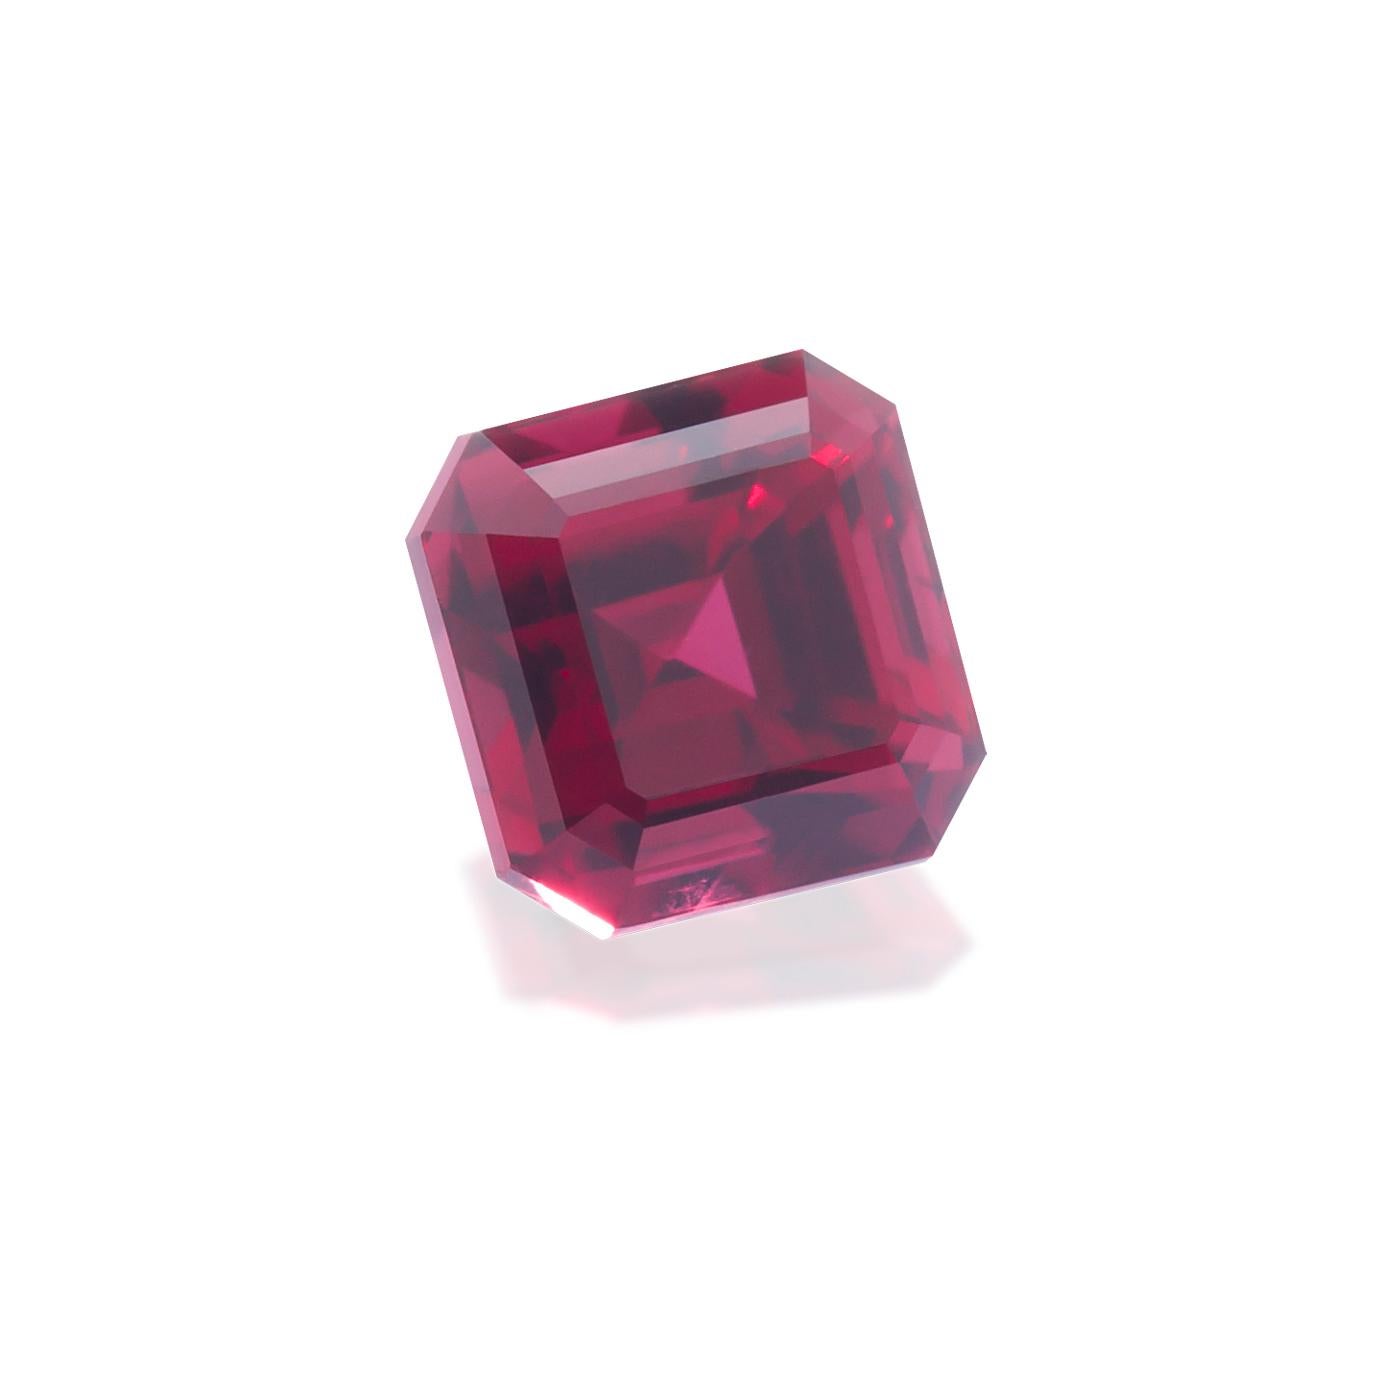 Ruby
Octagon Shape
Color Red
Brilliant/Step Cut
Dimension 4.60x4.62x3.67
Weight 0.785 cts.
Country of Origin Mozambique

GEM RARITY: UNEARTHLY THE RAREST GEM

Witness the unique journey of colored gemstones, experience a new level of iconic